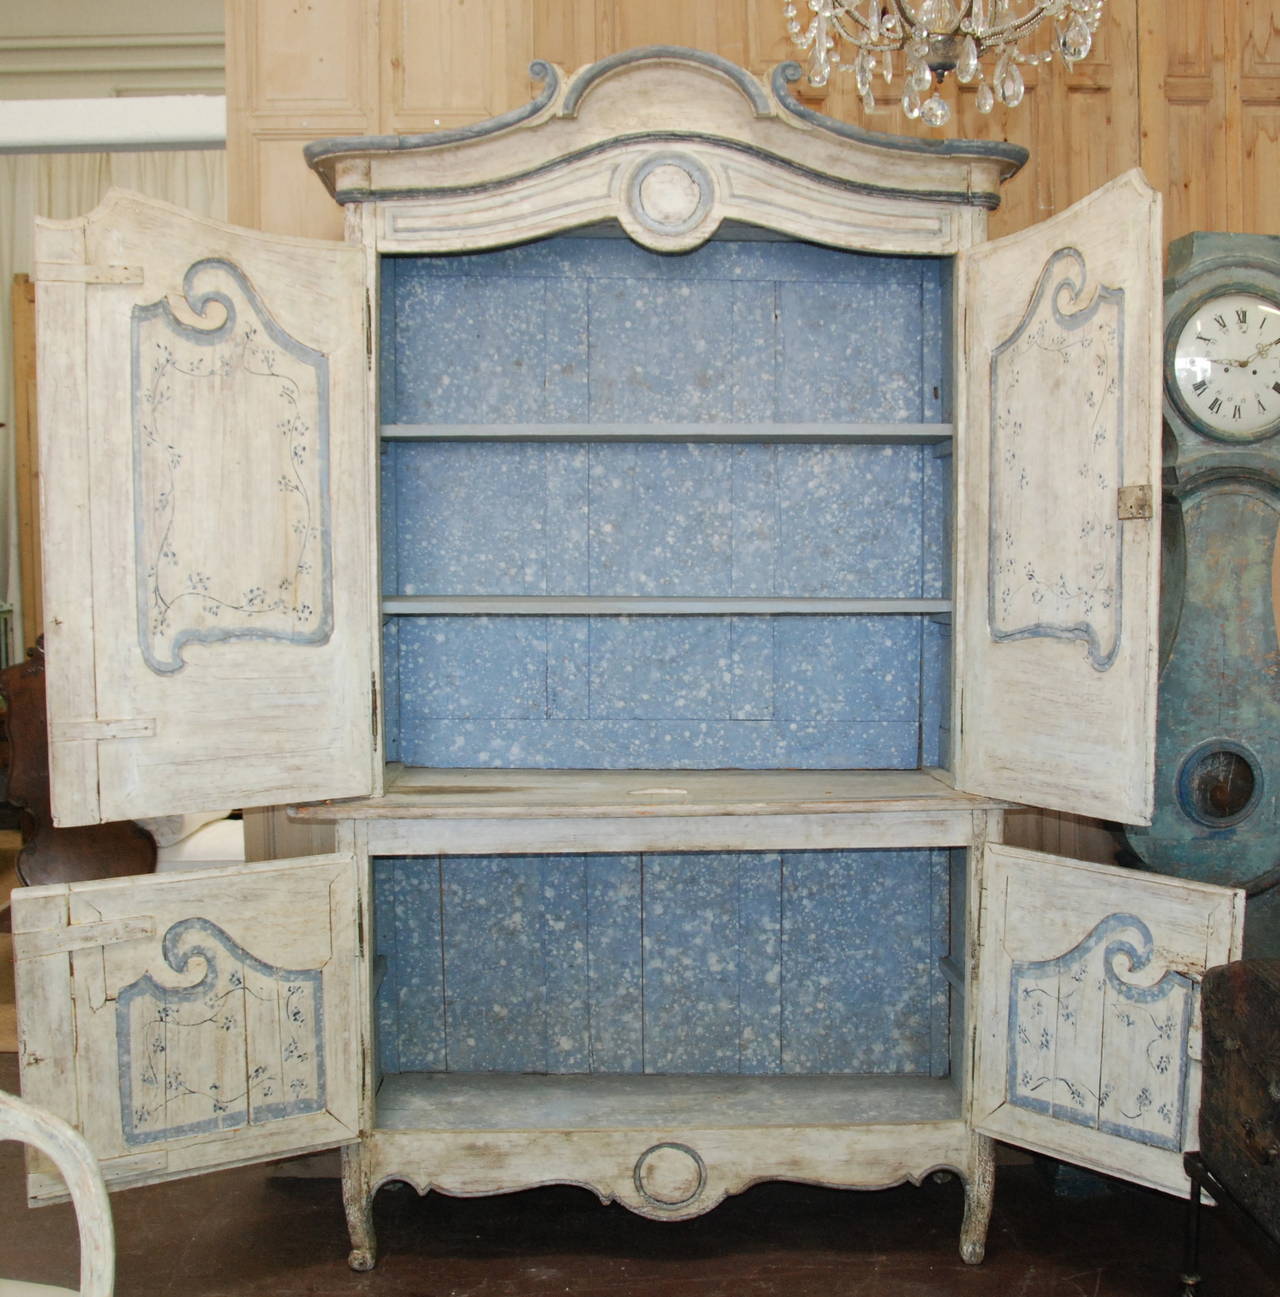 Lovely painted French buffet a Deux Corps from Provence, circa 1800. Original cream and blue painted exterior. Interior paint is old, but not original with two newly restored shelves.